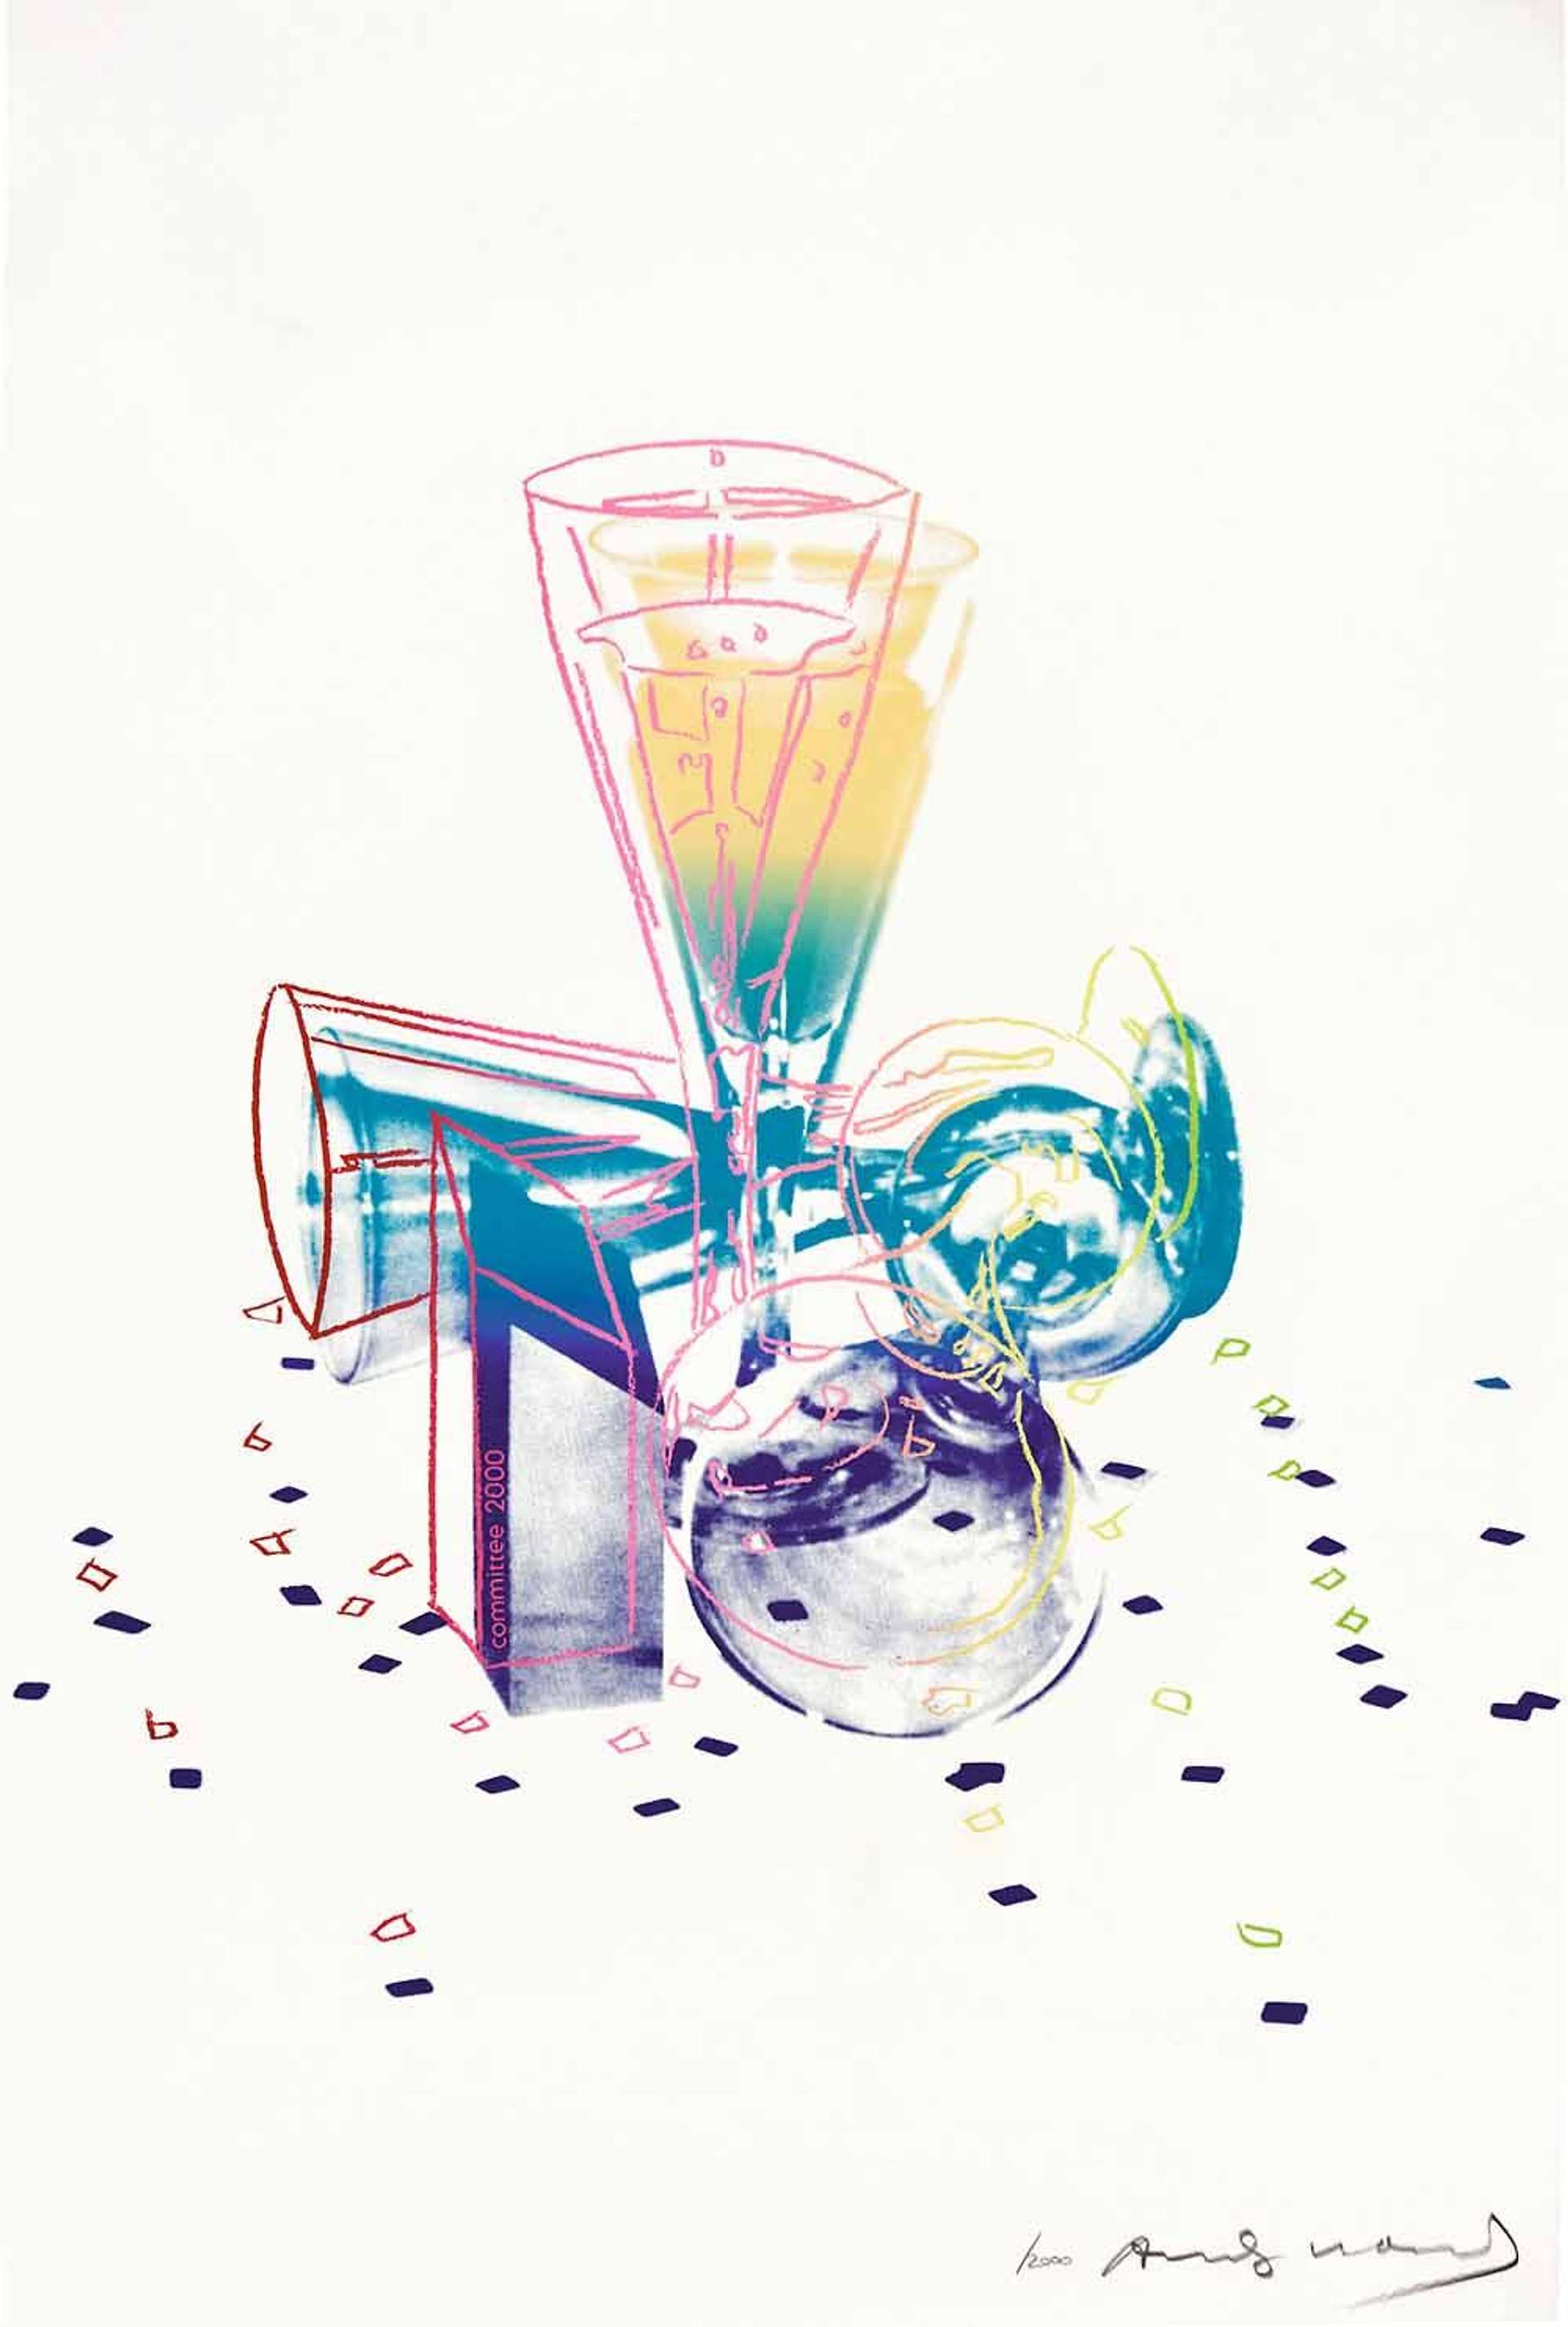 Sketched images of 3 cocktail glasses, two laying on the surface, one upright with a gradient of blue and yellow